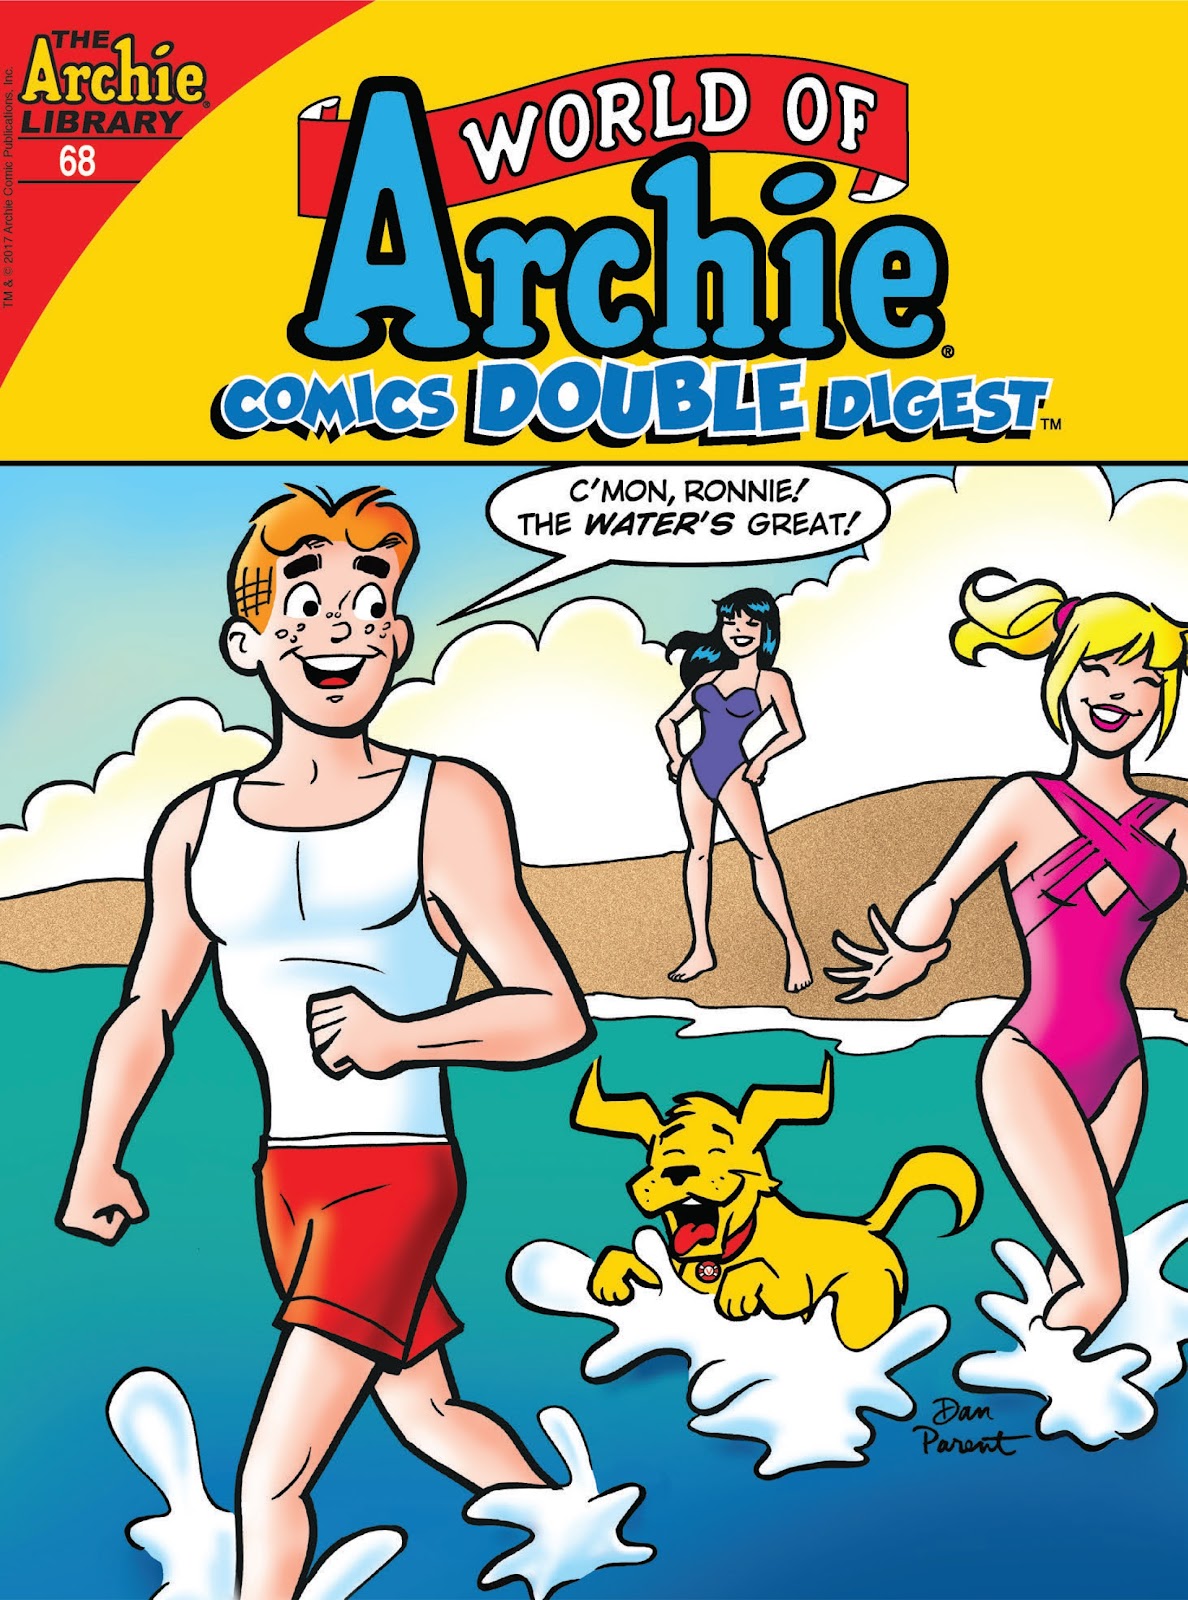 World of Archie Double Digest 68 Page 1.